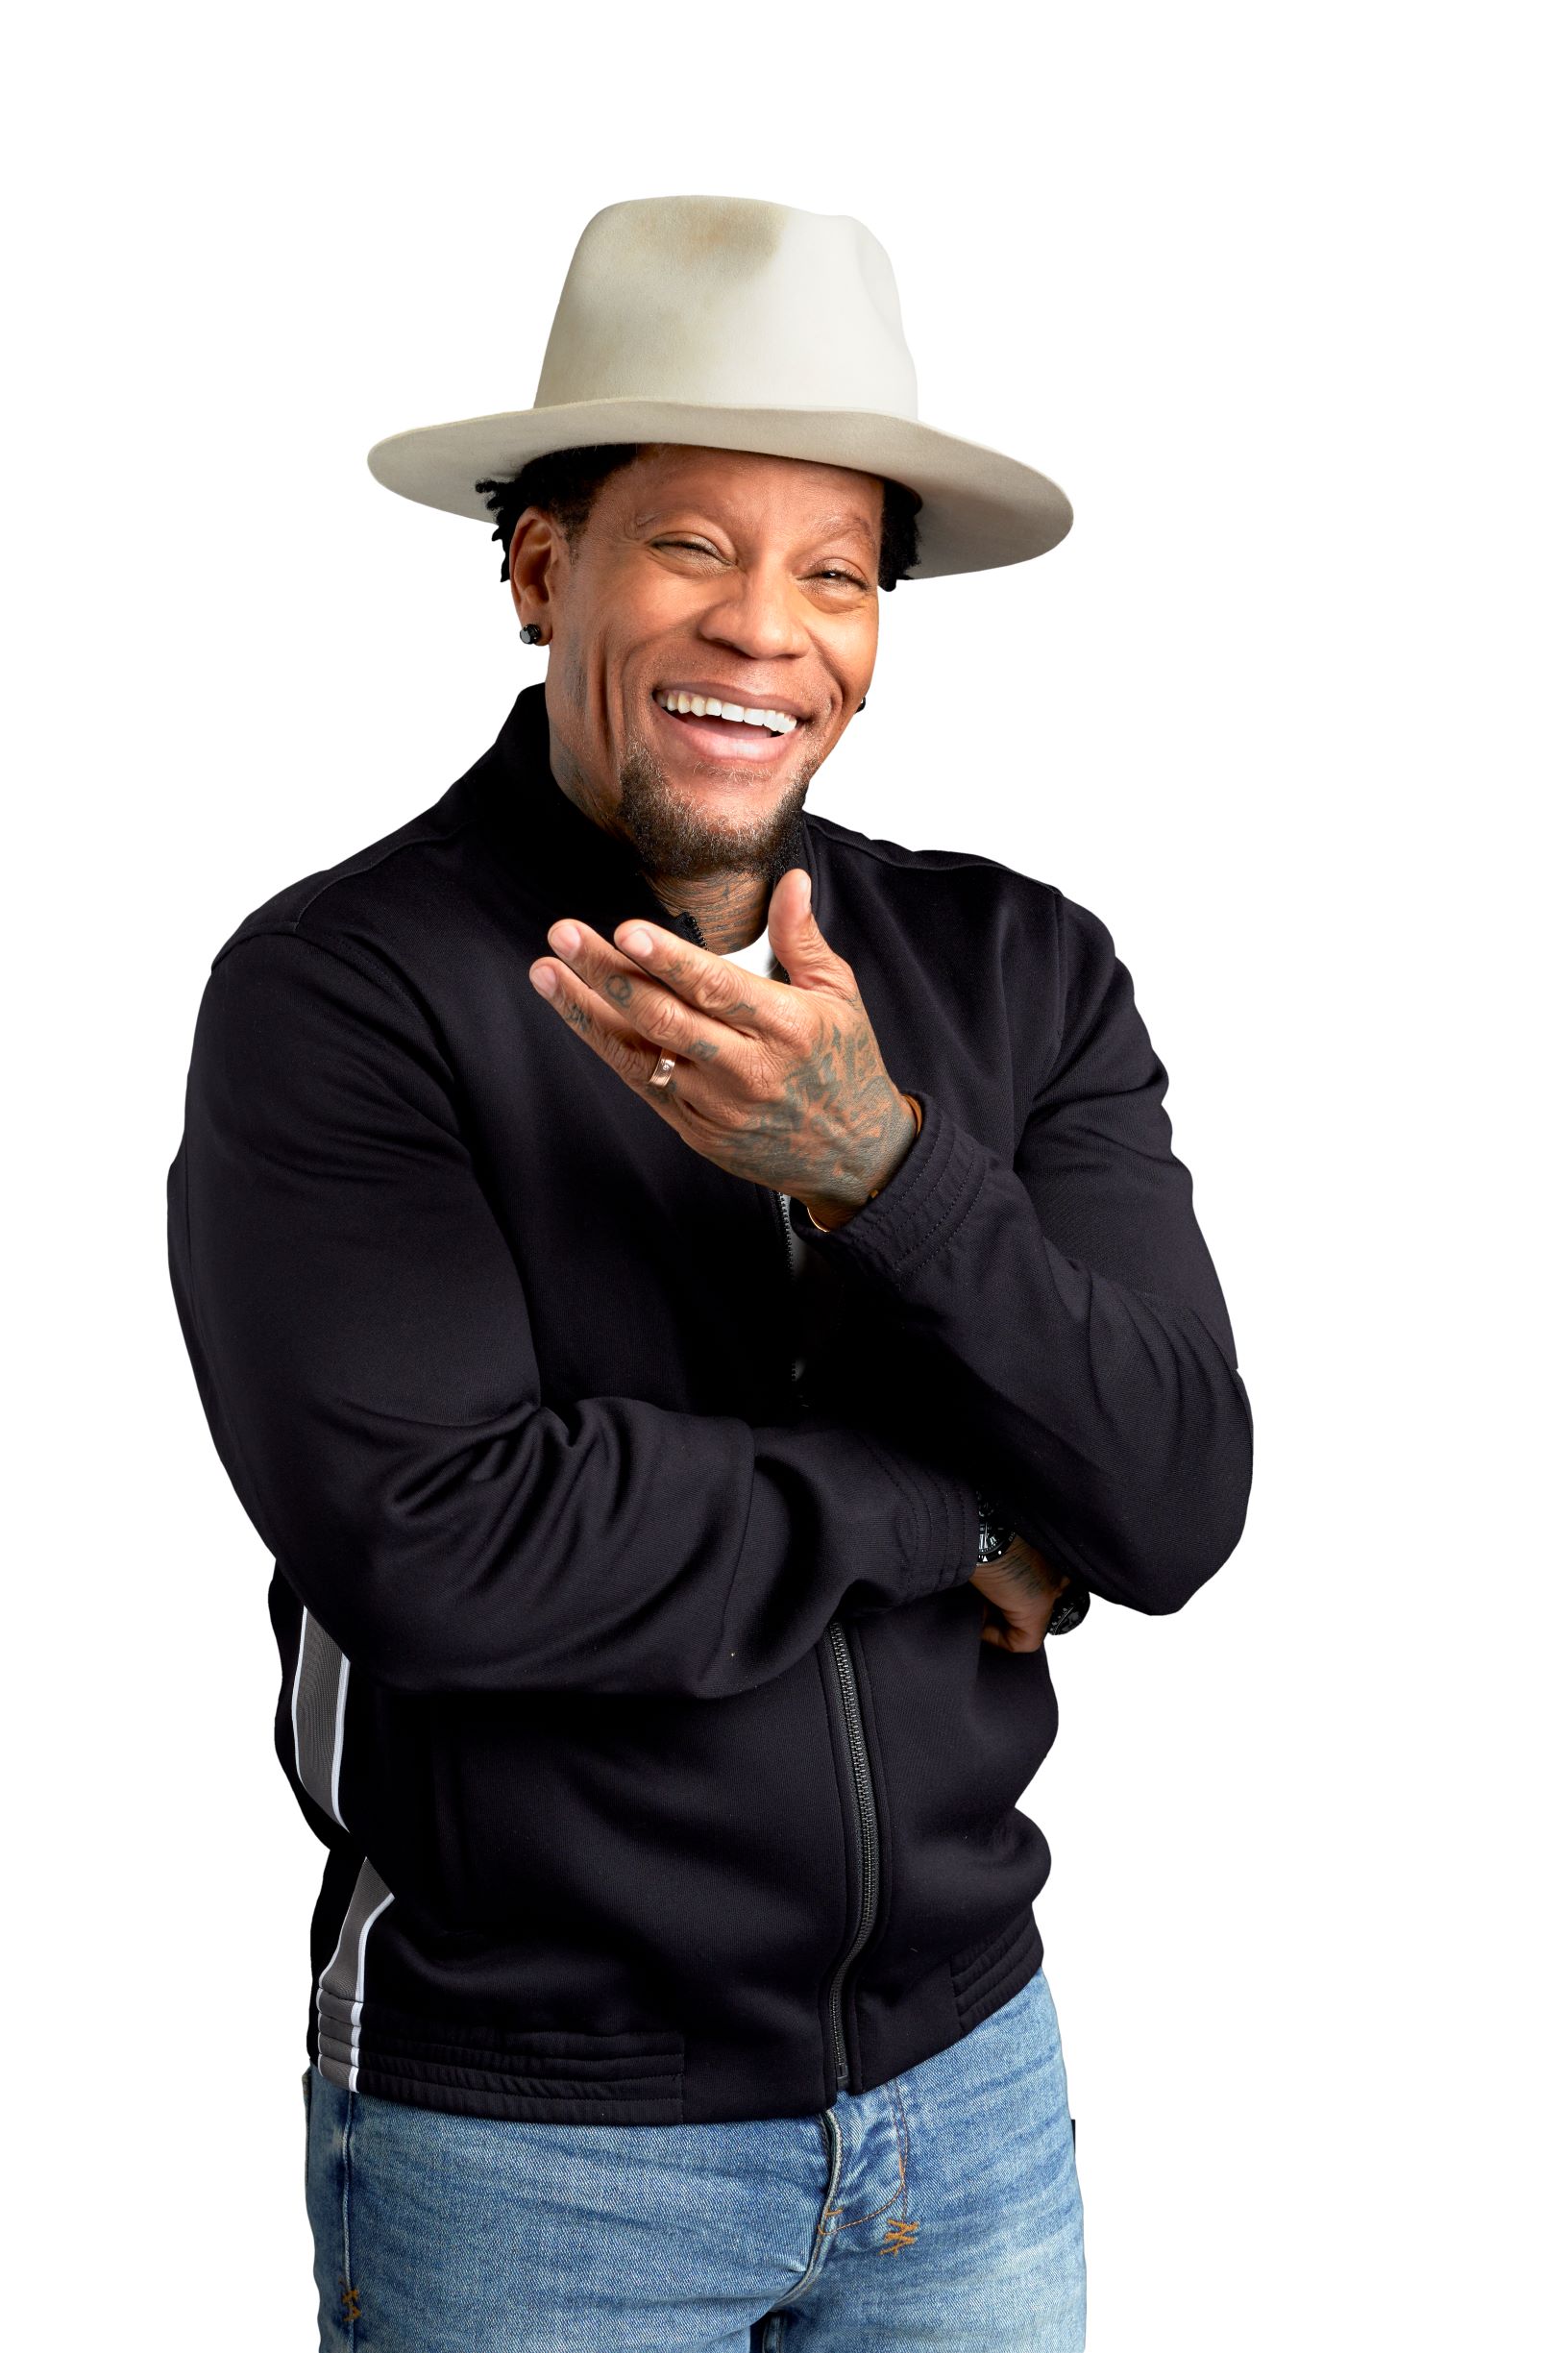 Celebrities, athletes and advocates currently supporting the HBCU Good Trouble voter campaign efforts leading up to this finale event including comic and radio host DL Hughley